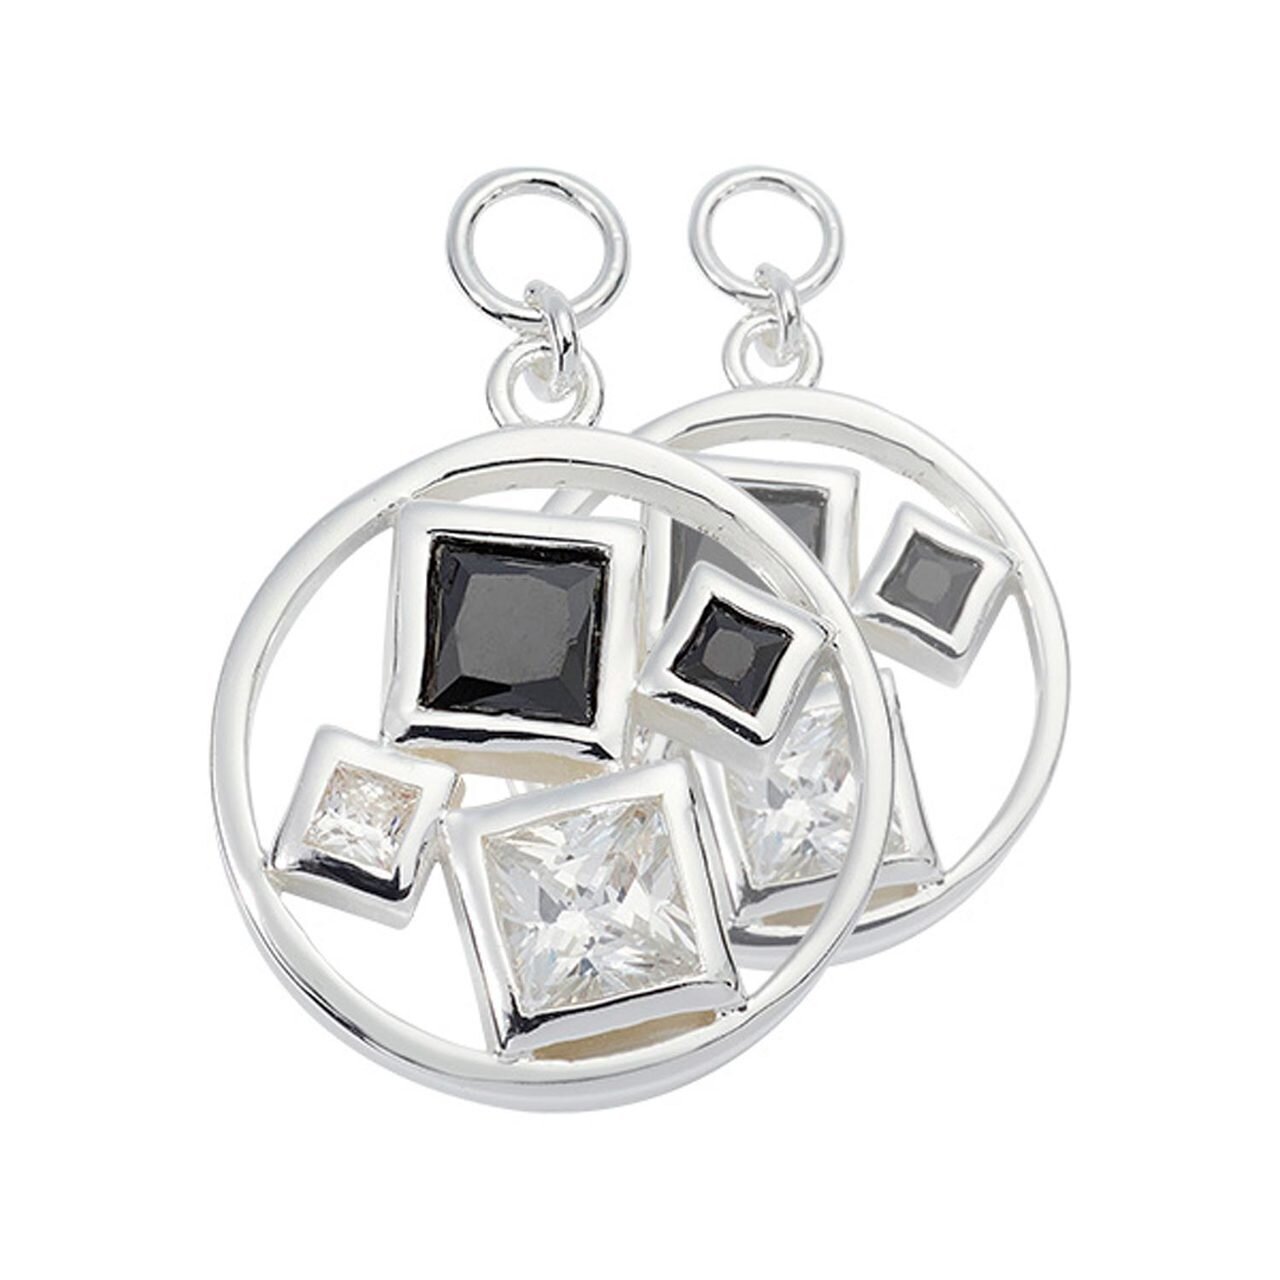 Nikki Lissoni Squared Earring Coins Silver-plated 15mm EAC2069SS